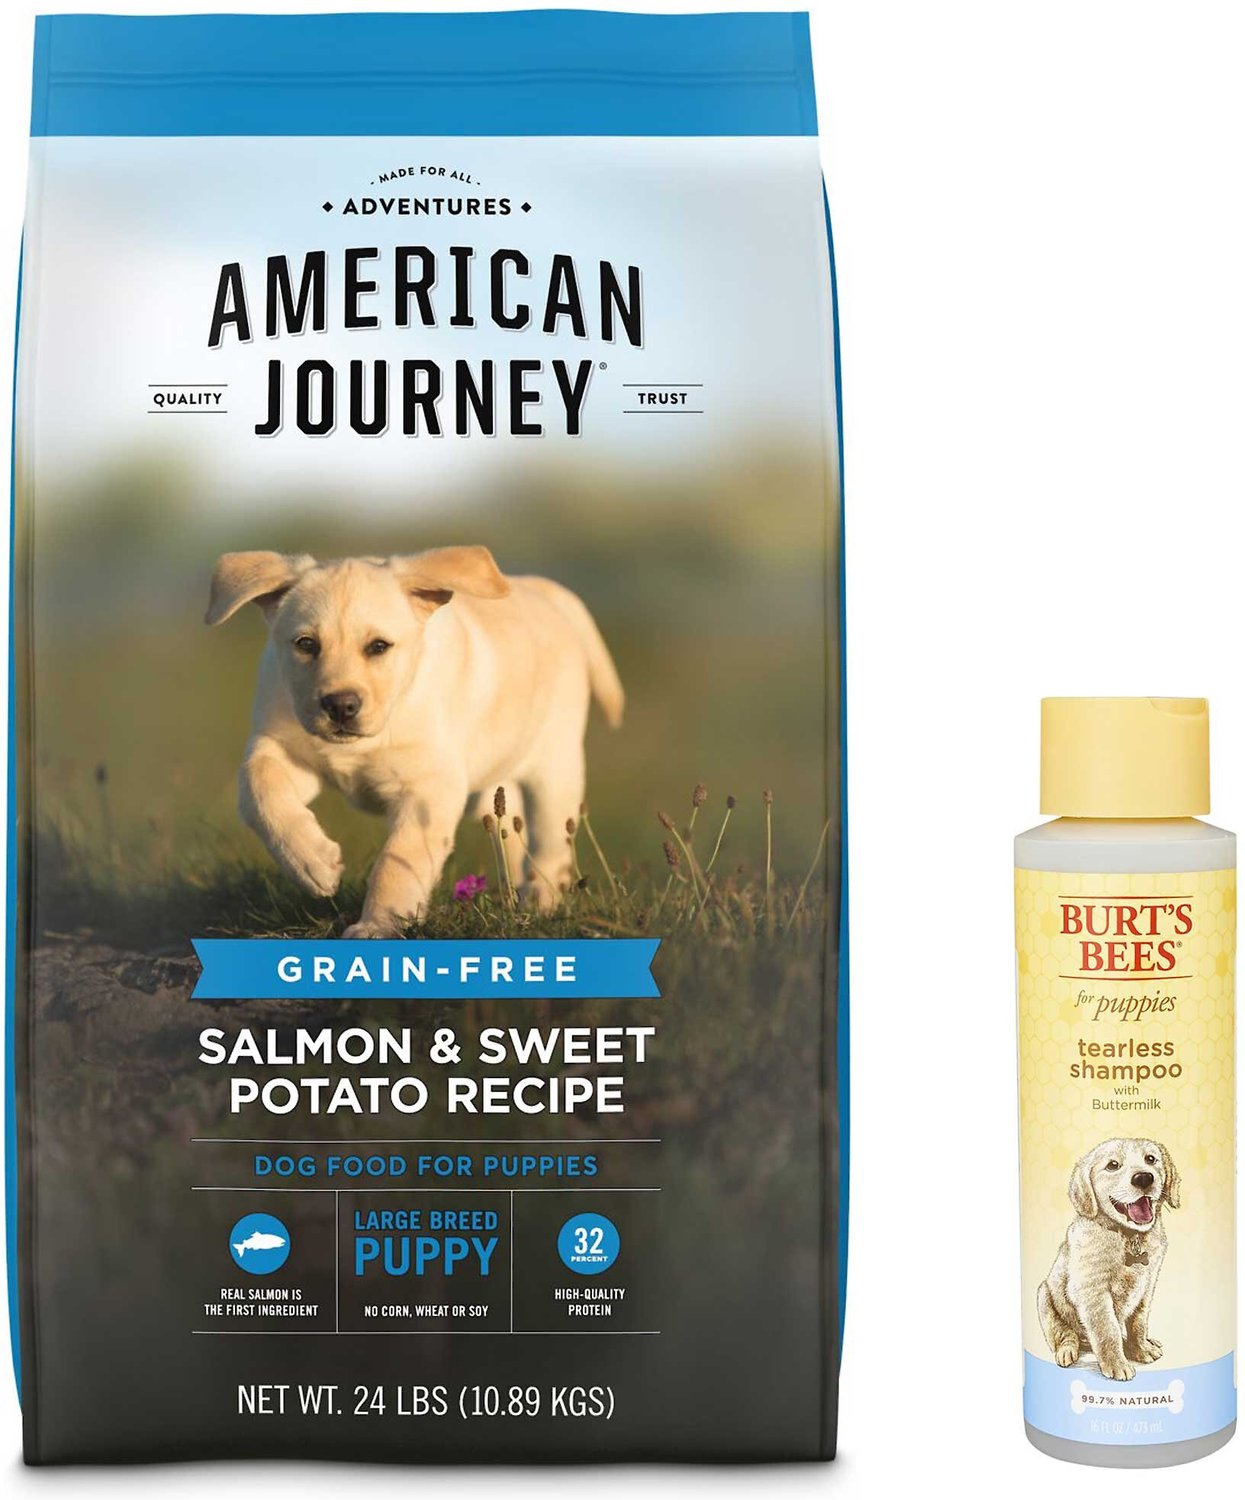 American Journey Large Breed Puppy Food Reviews